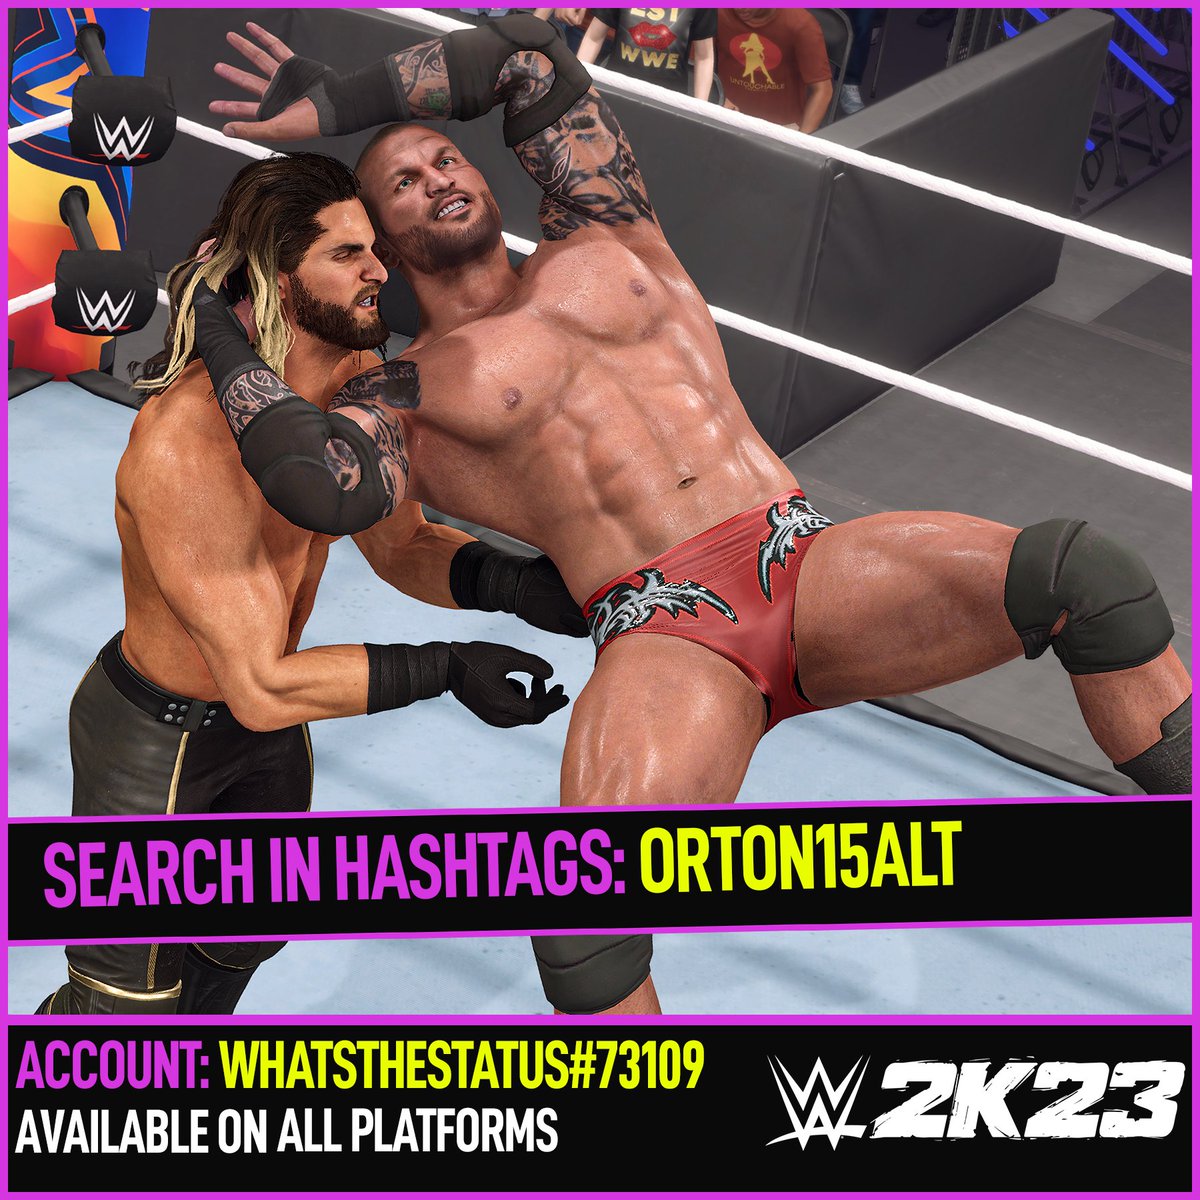 NEW! #WWE2K23 Upload To Community Creations! ★ Randy Orton '15 (Ingame model edit) ★ Search Tag → ORTON15ALT or WhatsTheStatus ★ INCLUDES ● Custom Portrait ● Commentary (Randy Orton) ● Ring Announcer Name (Randy Orton) ● New Hair ● New Beard ● side tattoo removed ●…